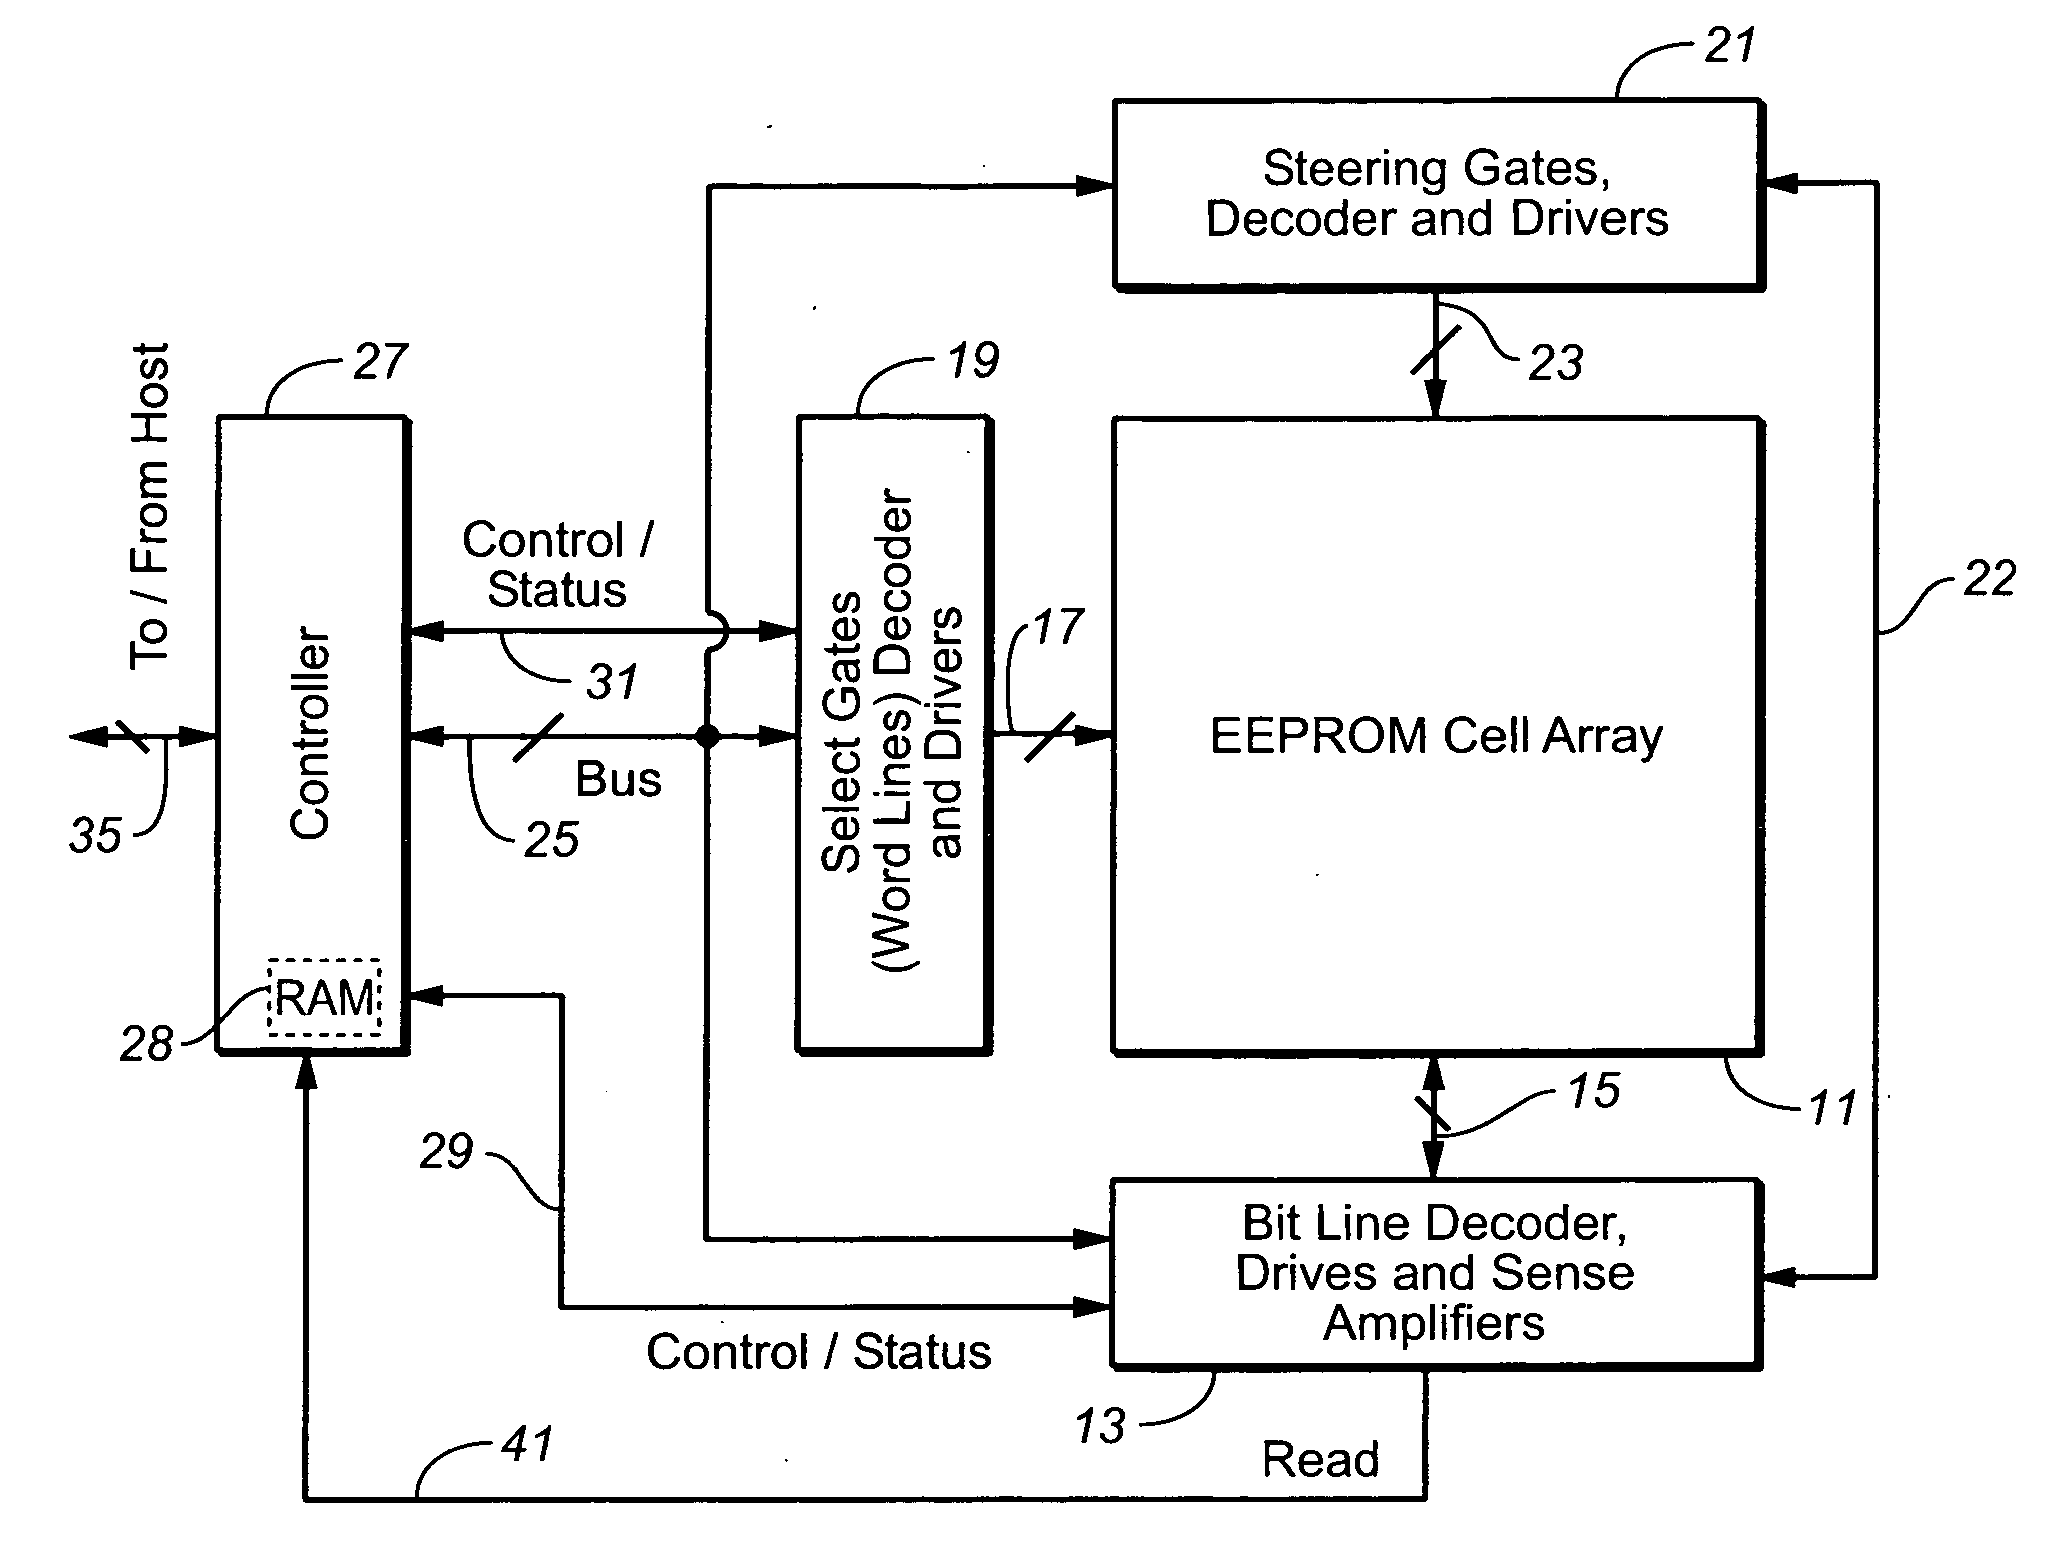 Method for copying data in reprogrammable non-volatile memory